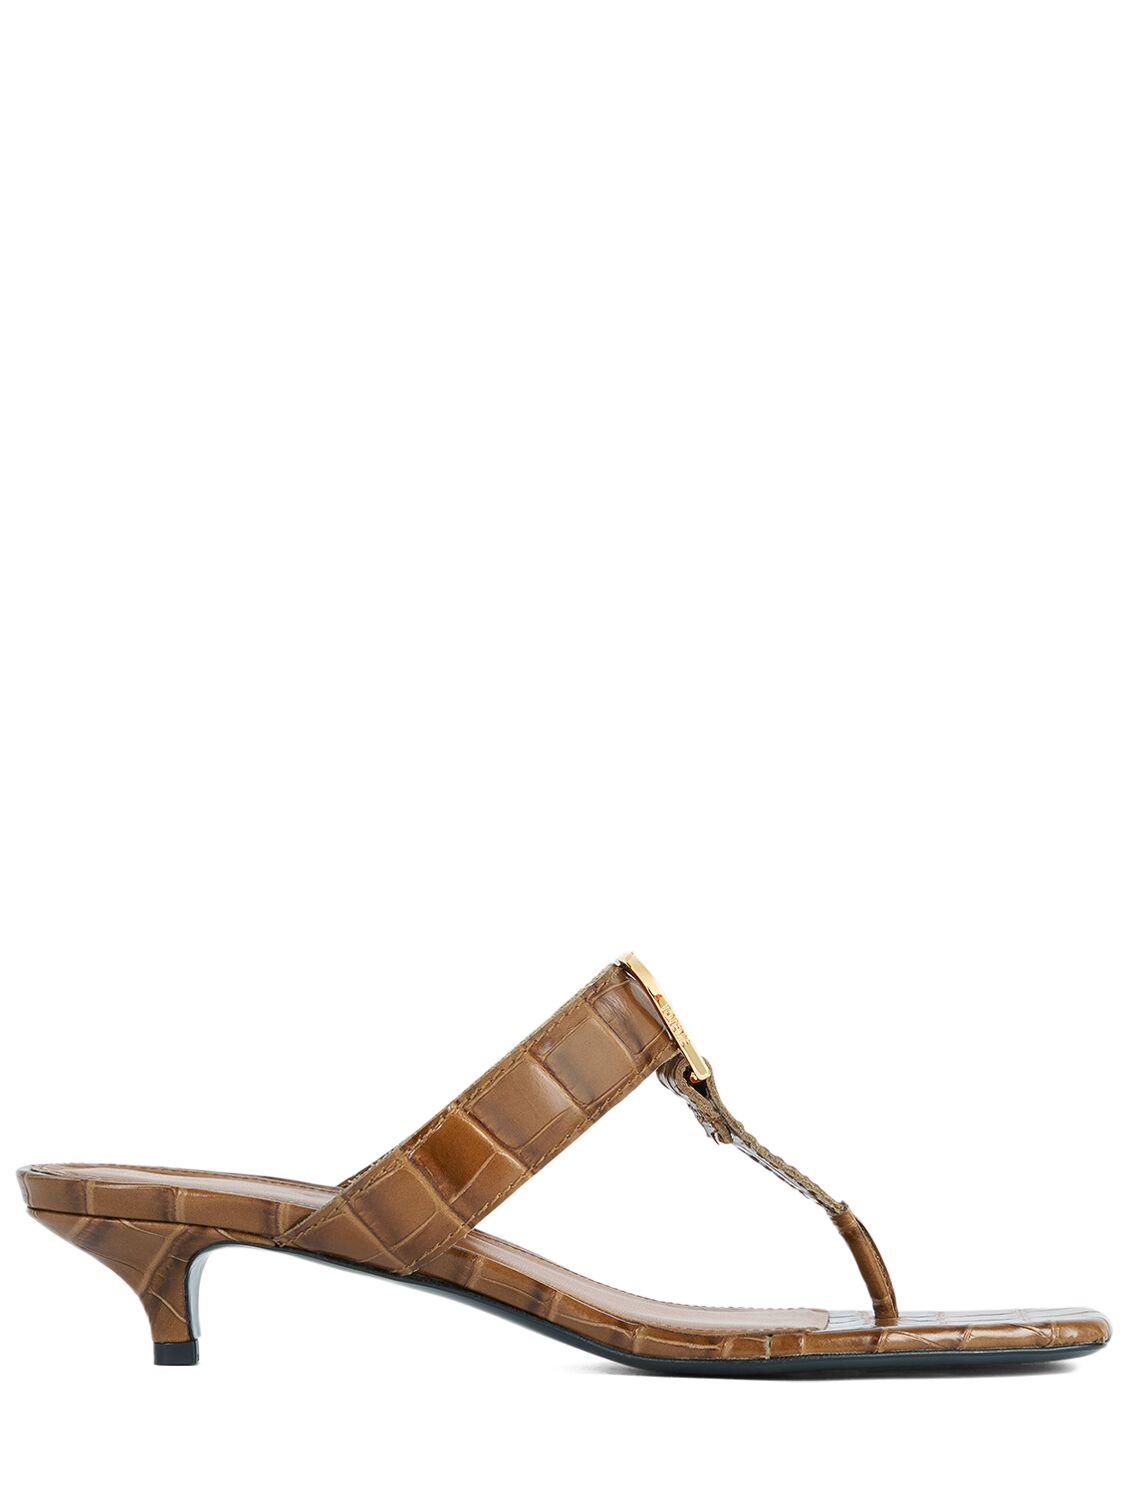 Totême 35mm Croc Embossed Leather Thong Sandals In Brown